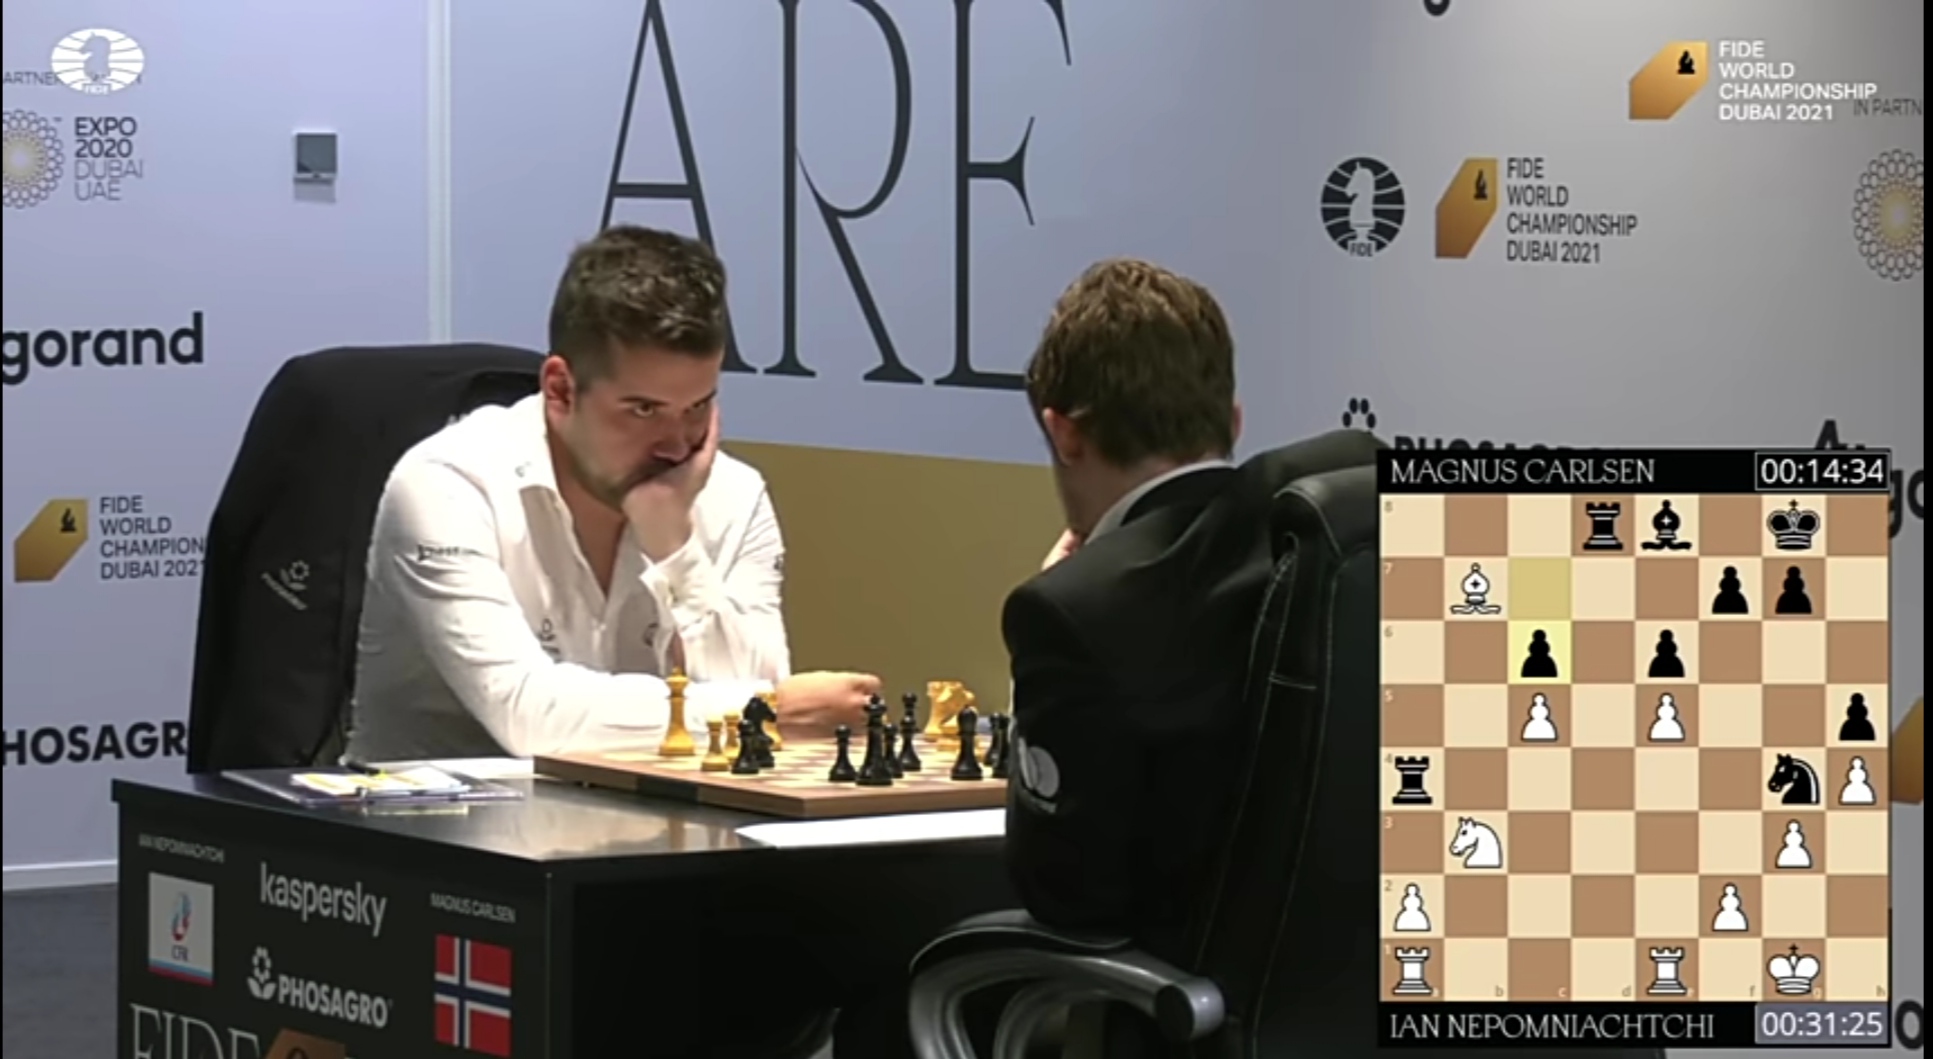 Carlsen Inflicts Third Loss On Nepo After The Latter Shocking Piece Blunder. Is This The End?